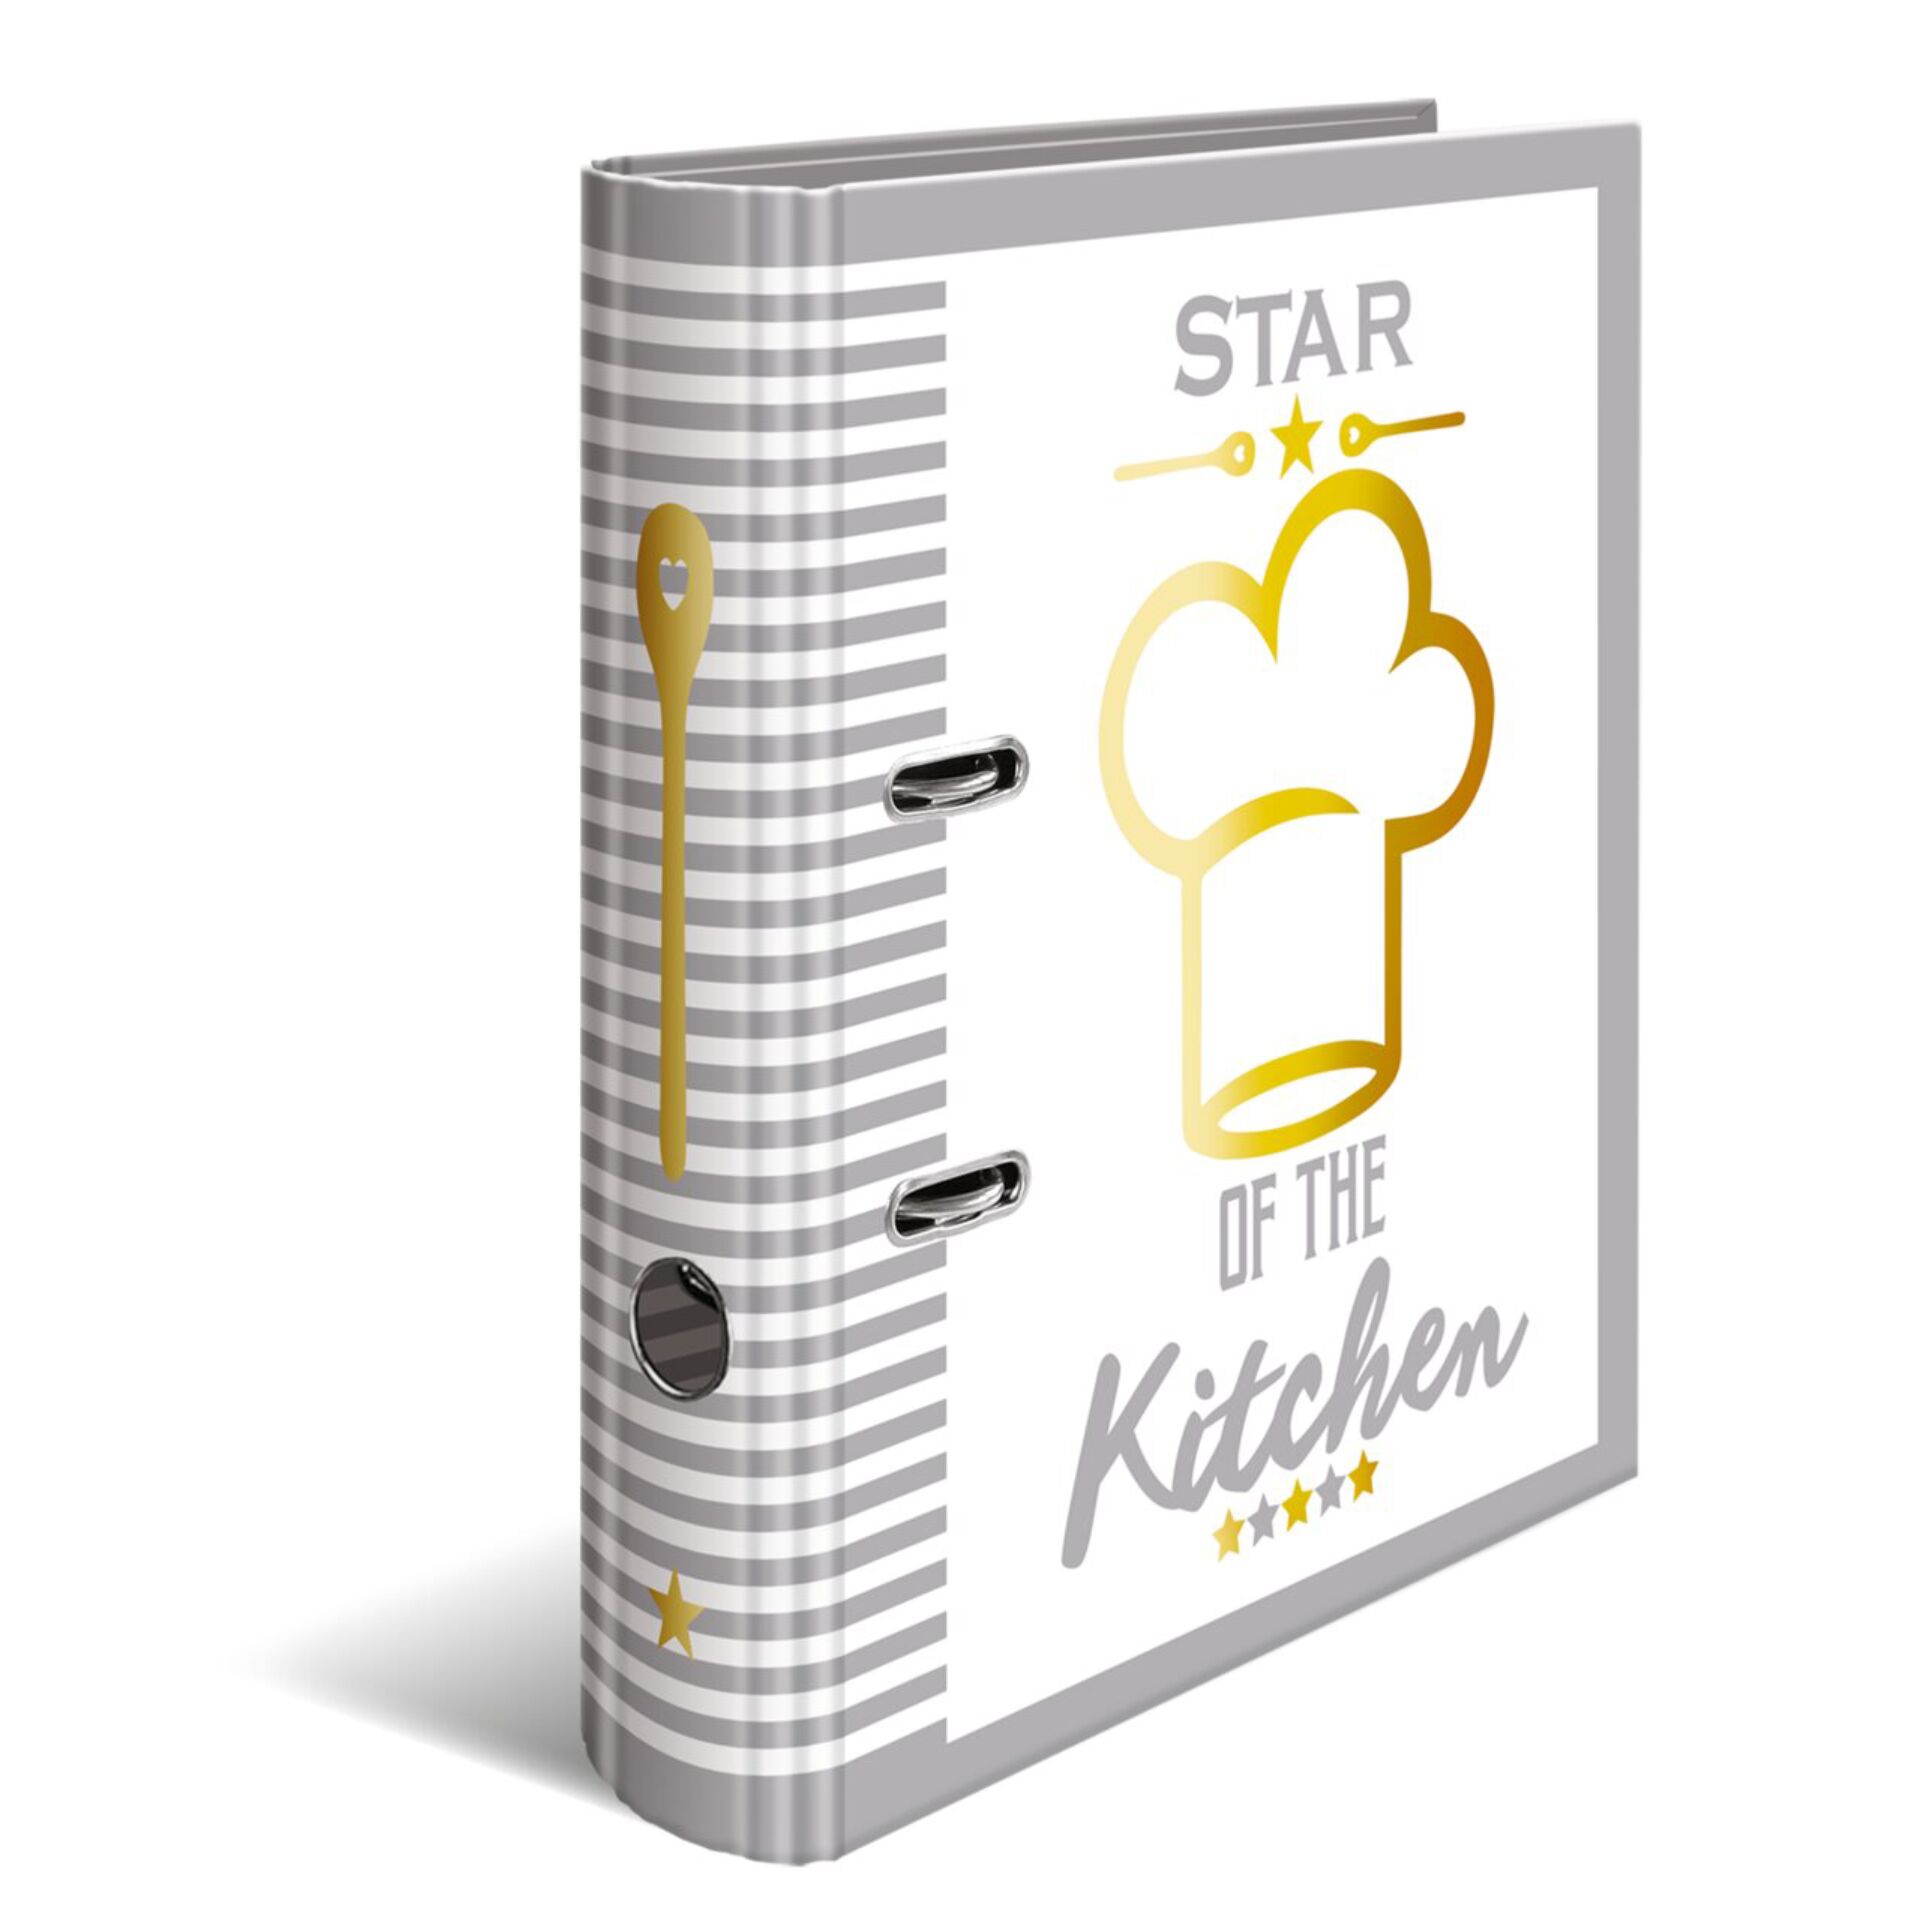 Herma Folder Star of the Kitchen DIN A4 NEW 2023 19662